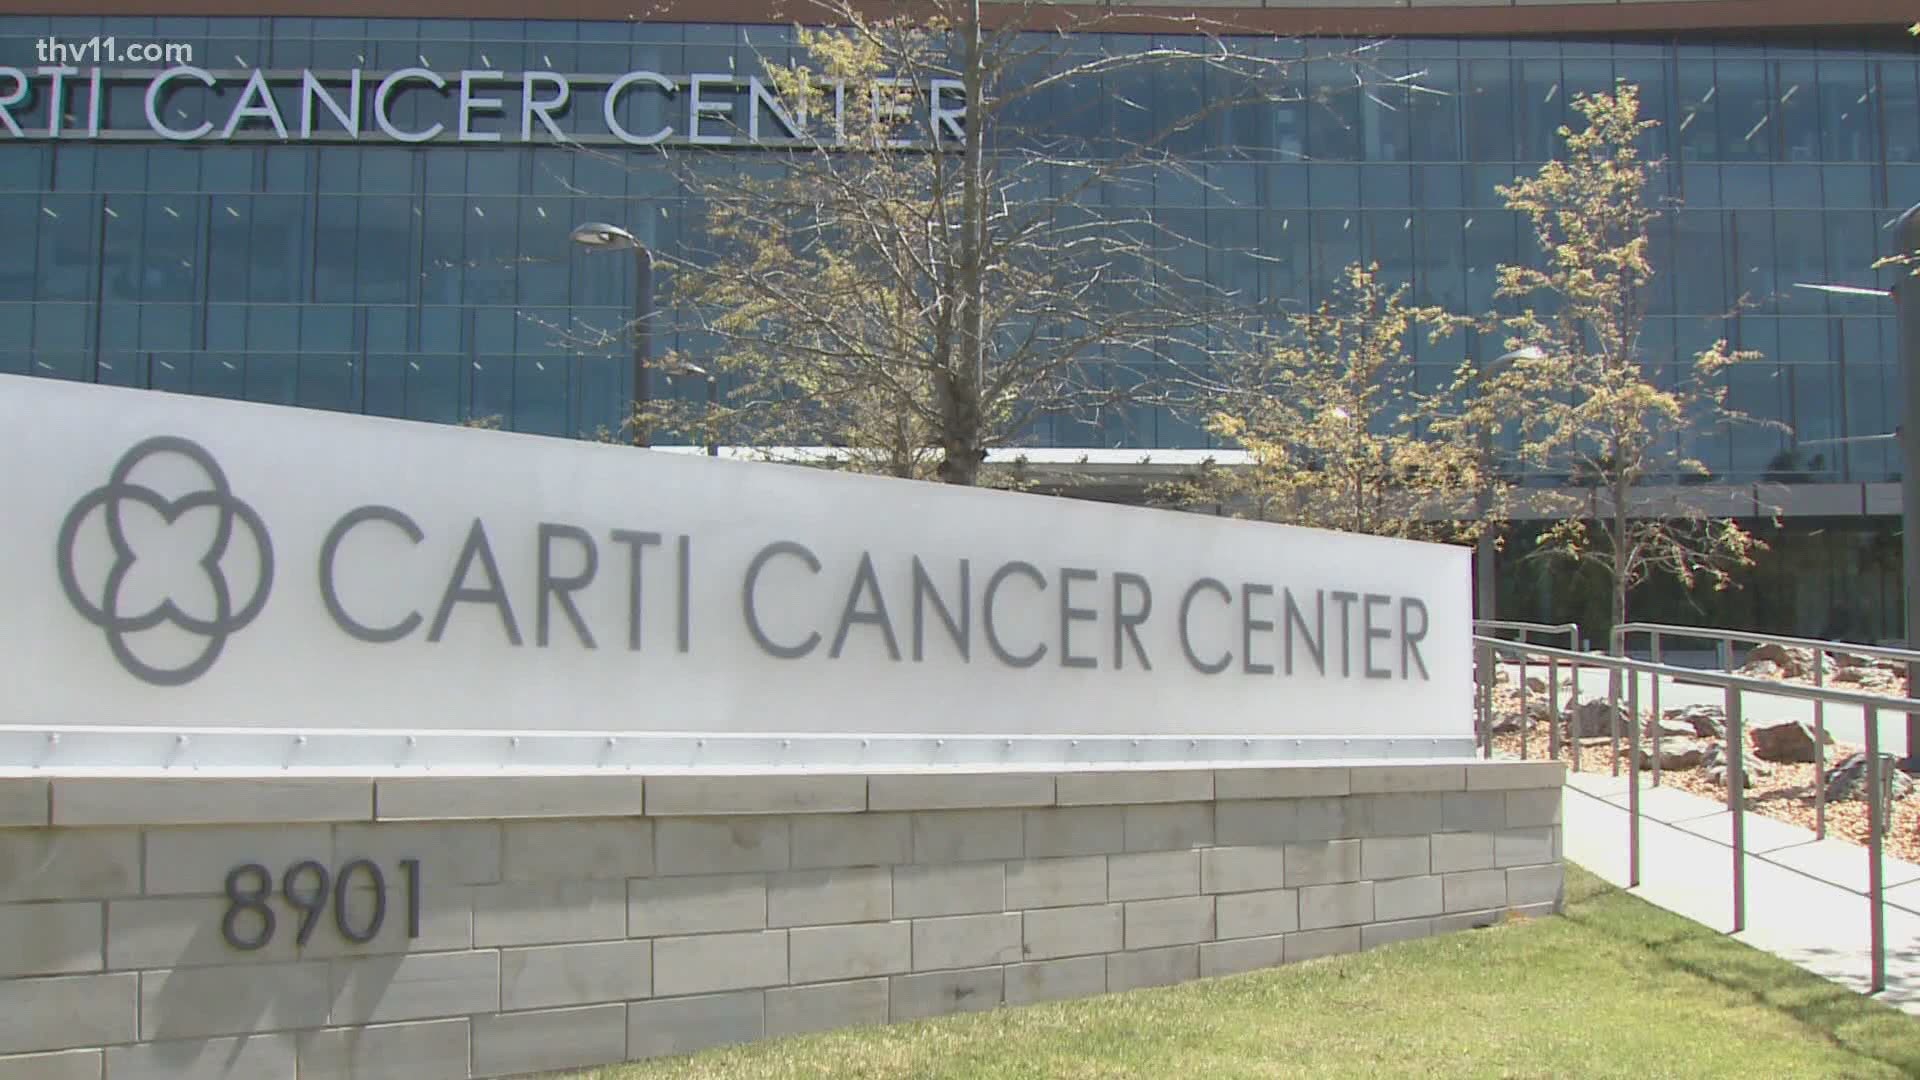 CARTI just announced they are building a comprehensive cancer center in Pine Bluff and adding five new physicians to the medical team.